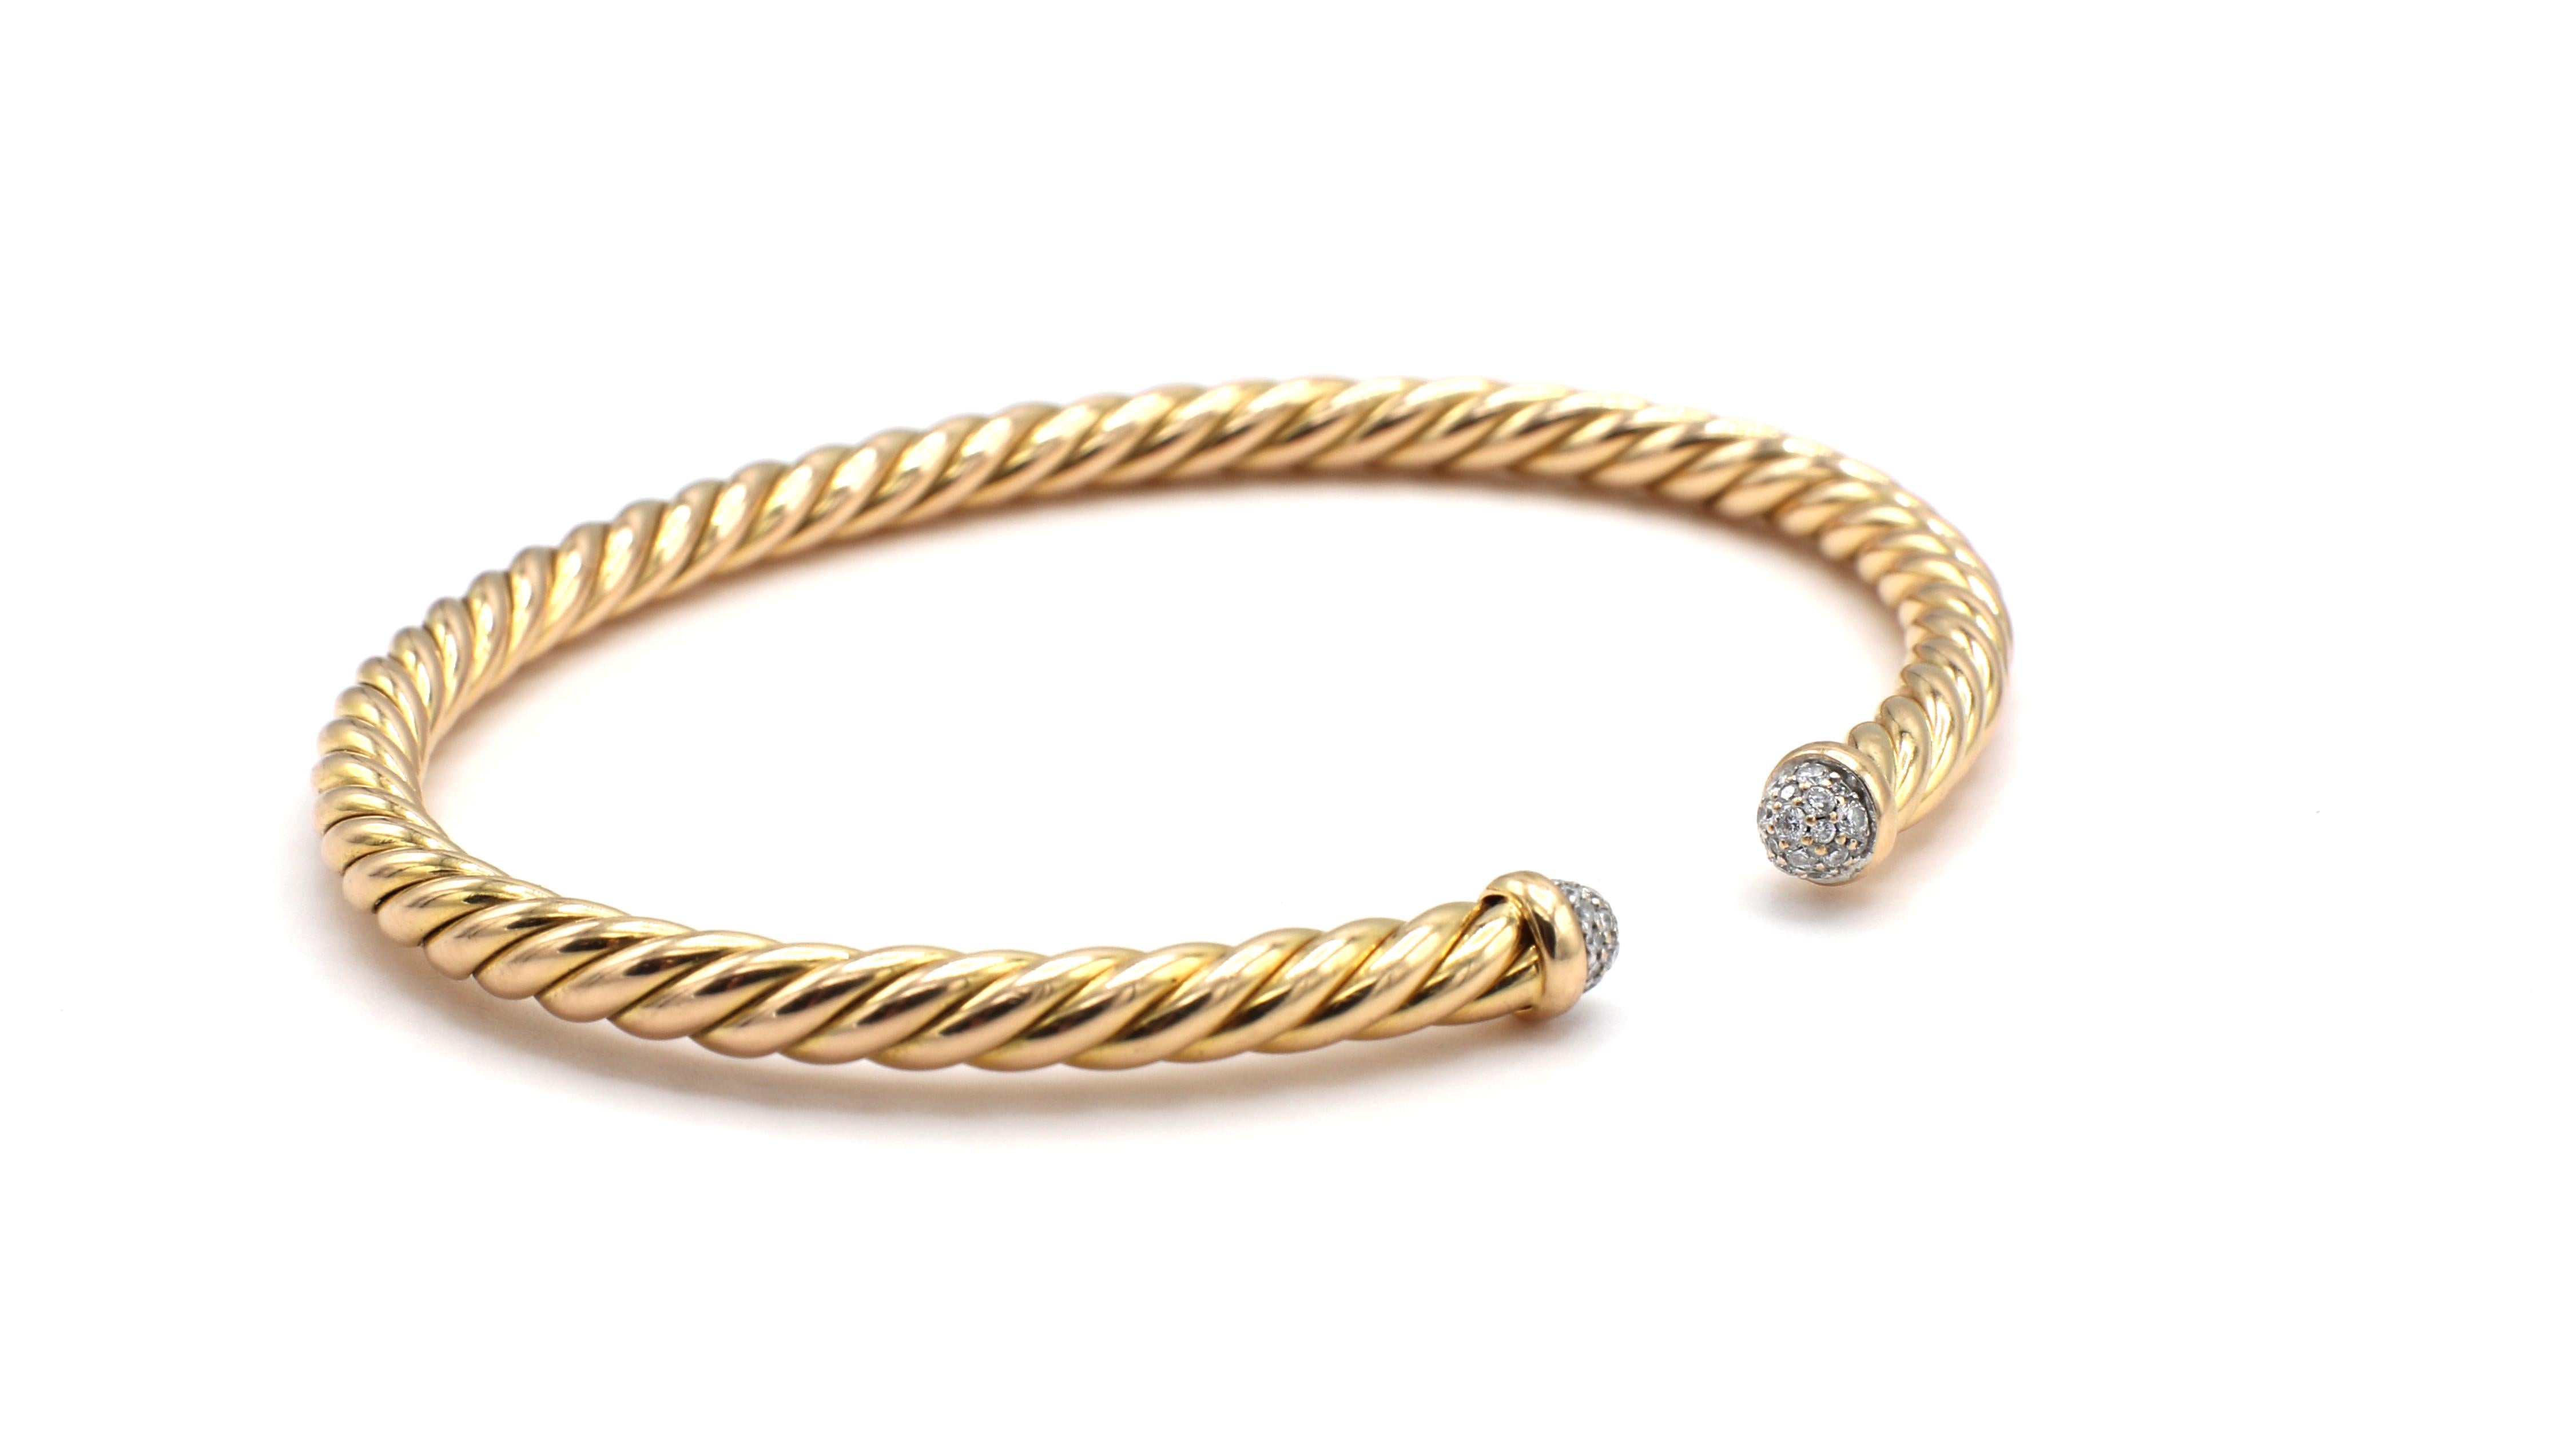 David Yurman Cable Collection Spira Diamond 18K Rose Gold Bracelet 4mm
Metal: 18k rose/pink gold
Weight: 8.06 grams
Diamonds: Approx. .19 CTW G VS
Width: 4MM
Signed: D.Y. 750
Retail: $2,500 USD